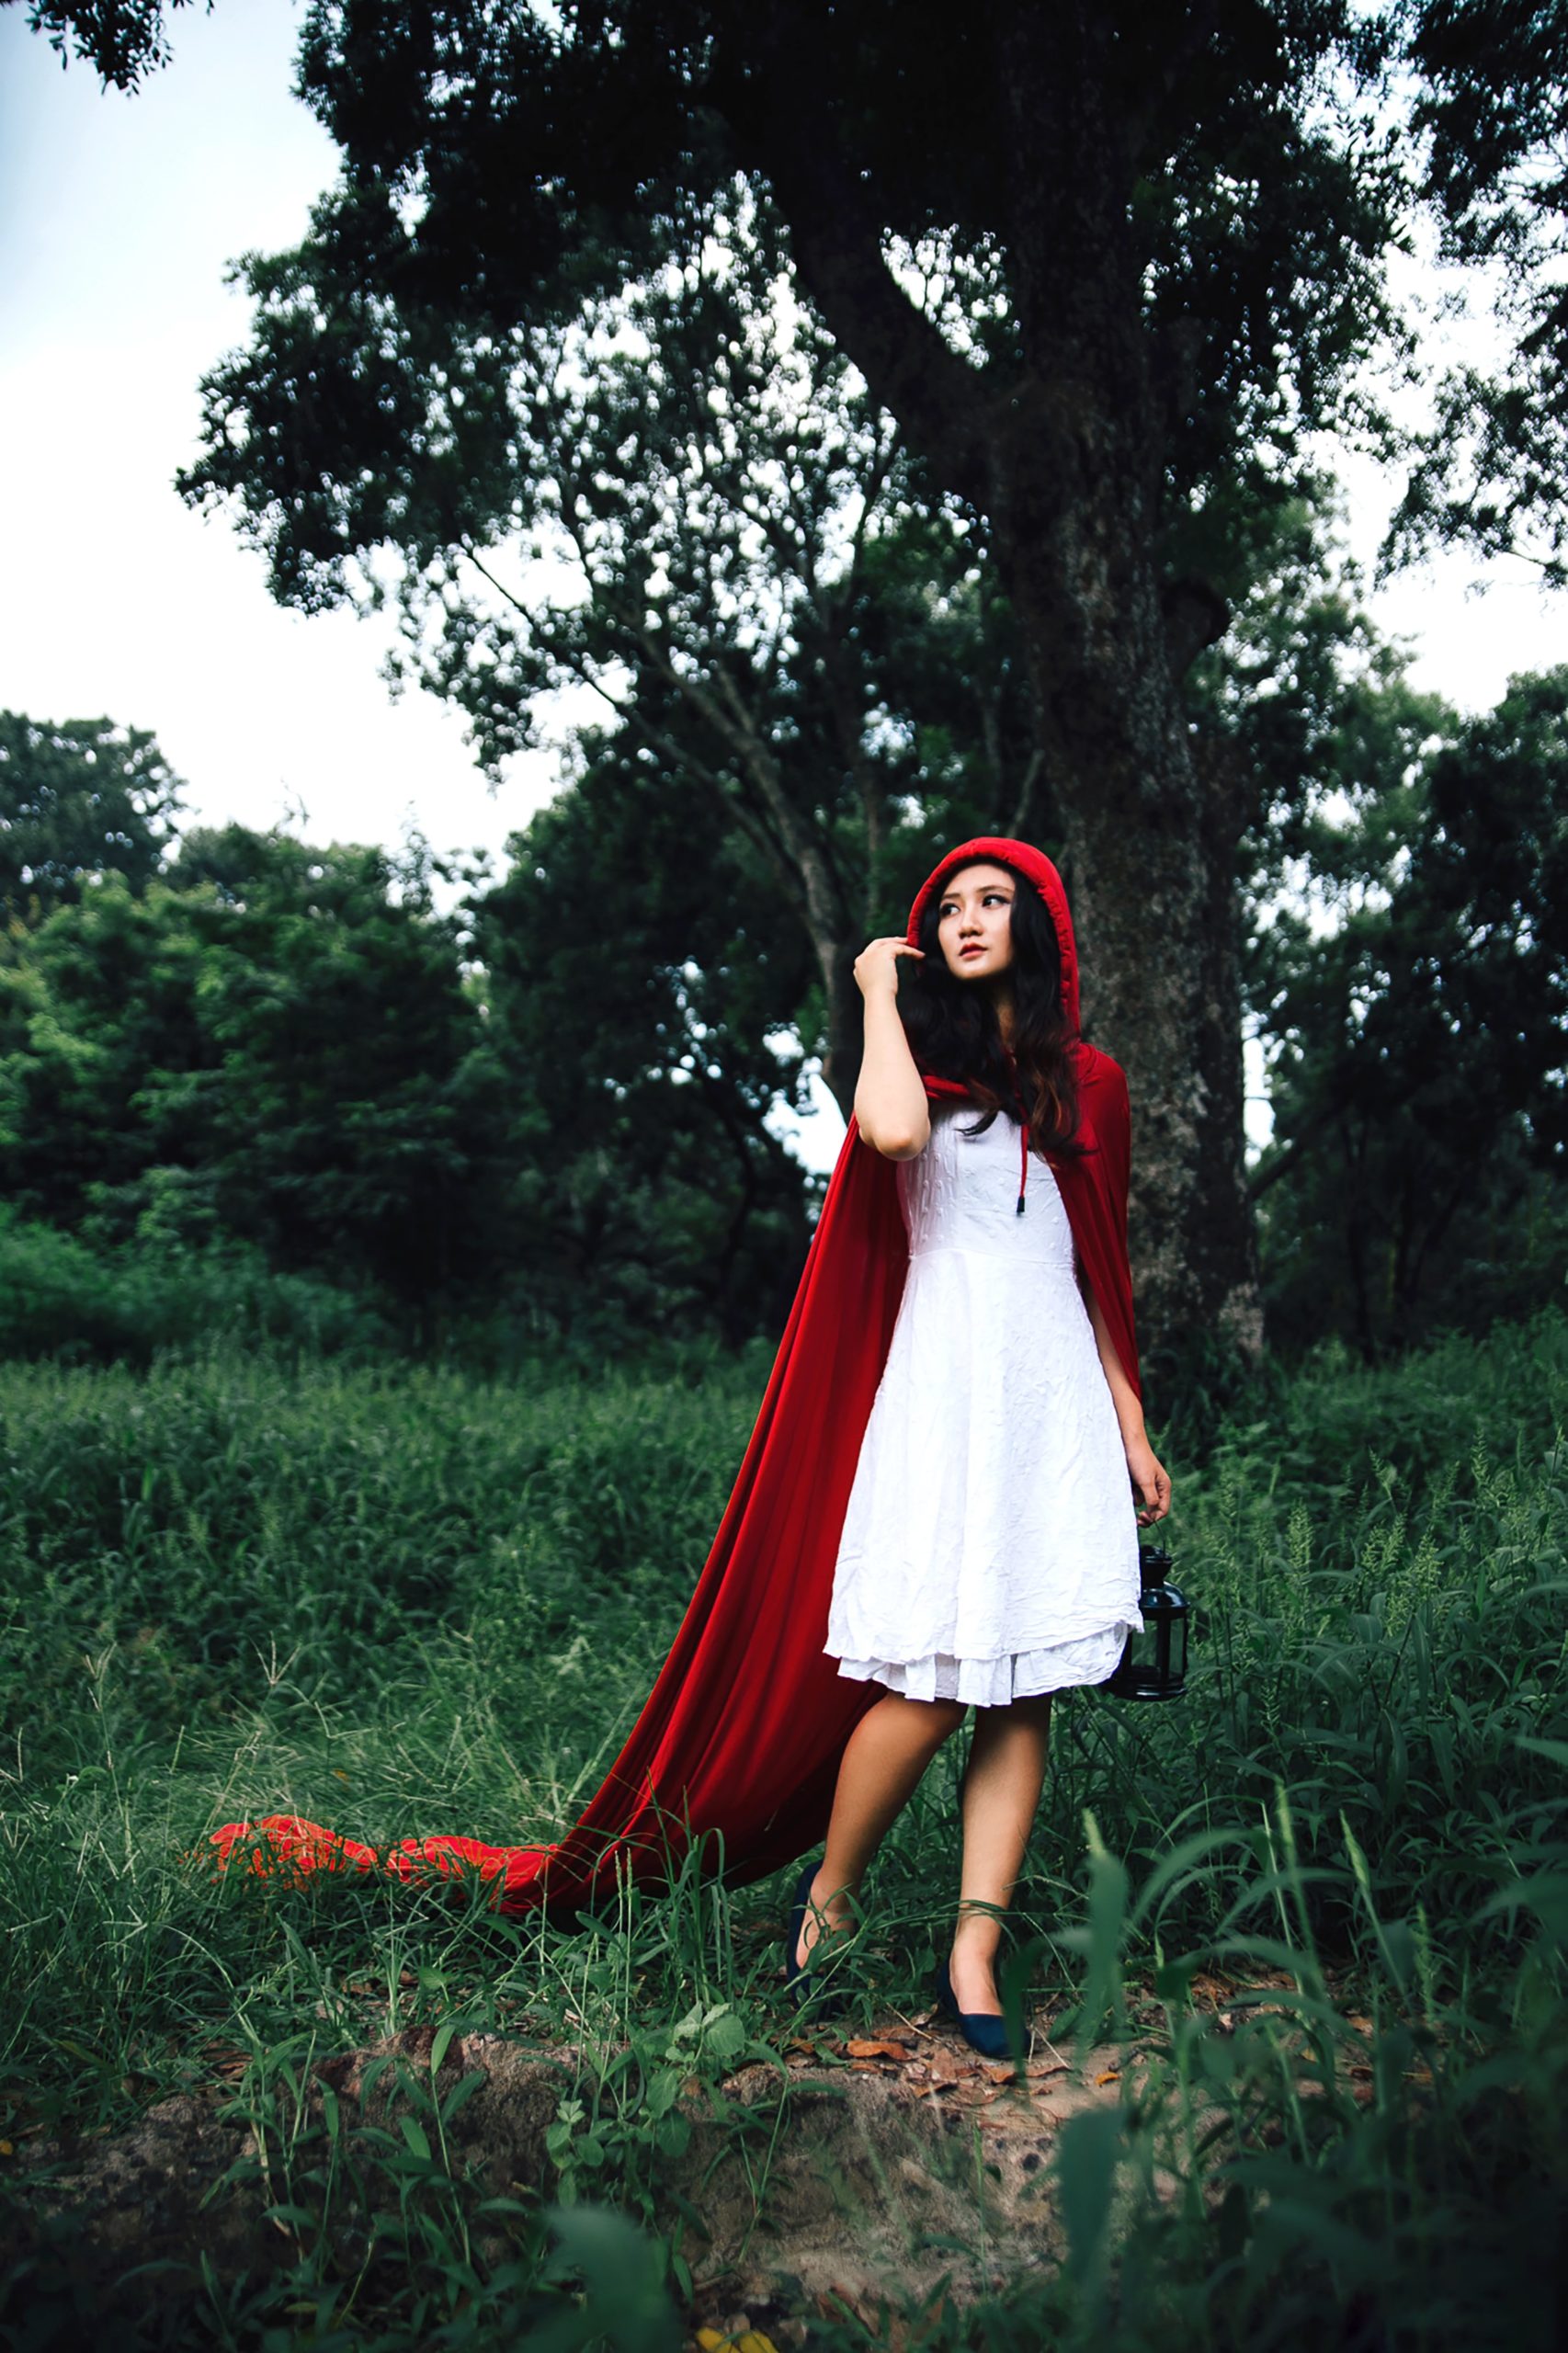 red riding hood story